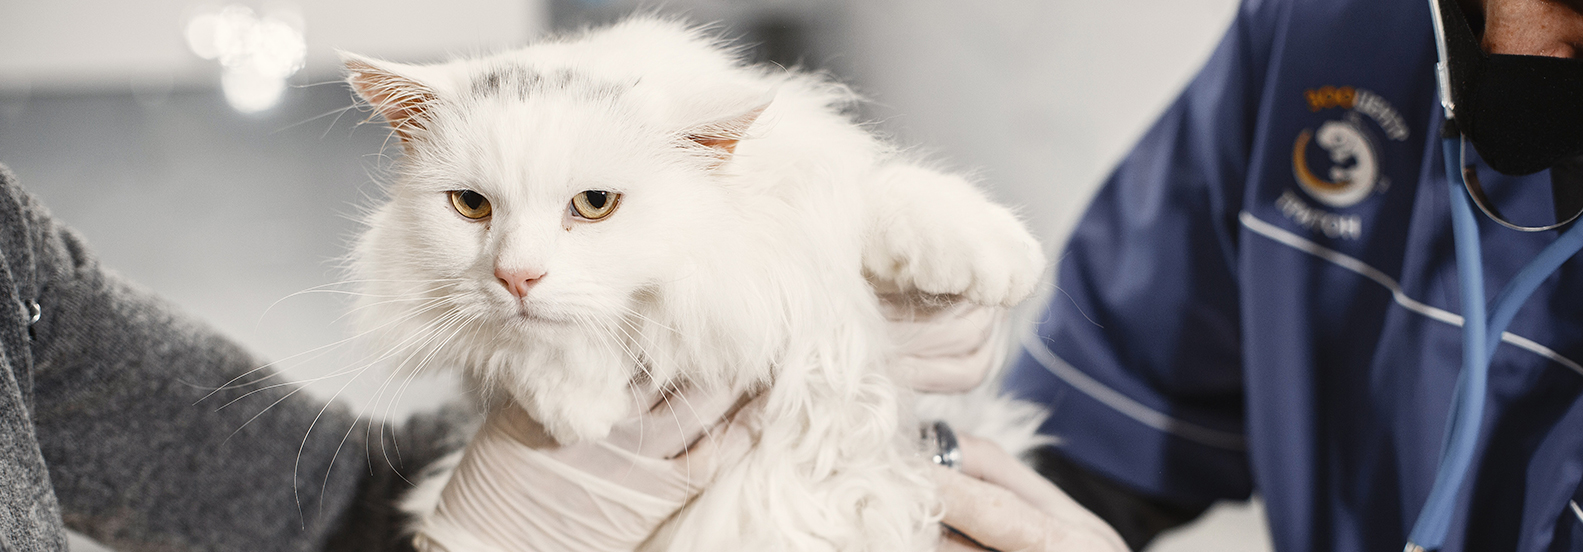 Stay Ahead of the Game – Why Routine Vet Visits Are Vital for Your Cat’s Health